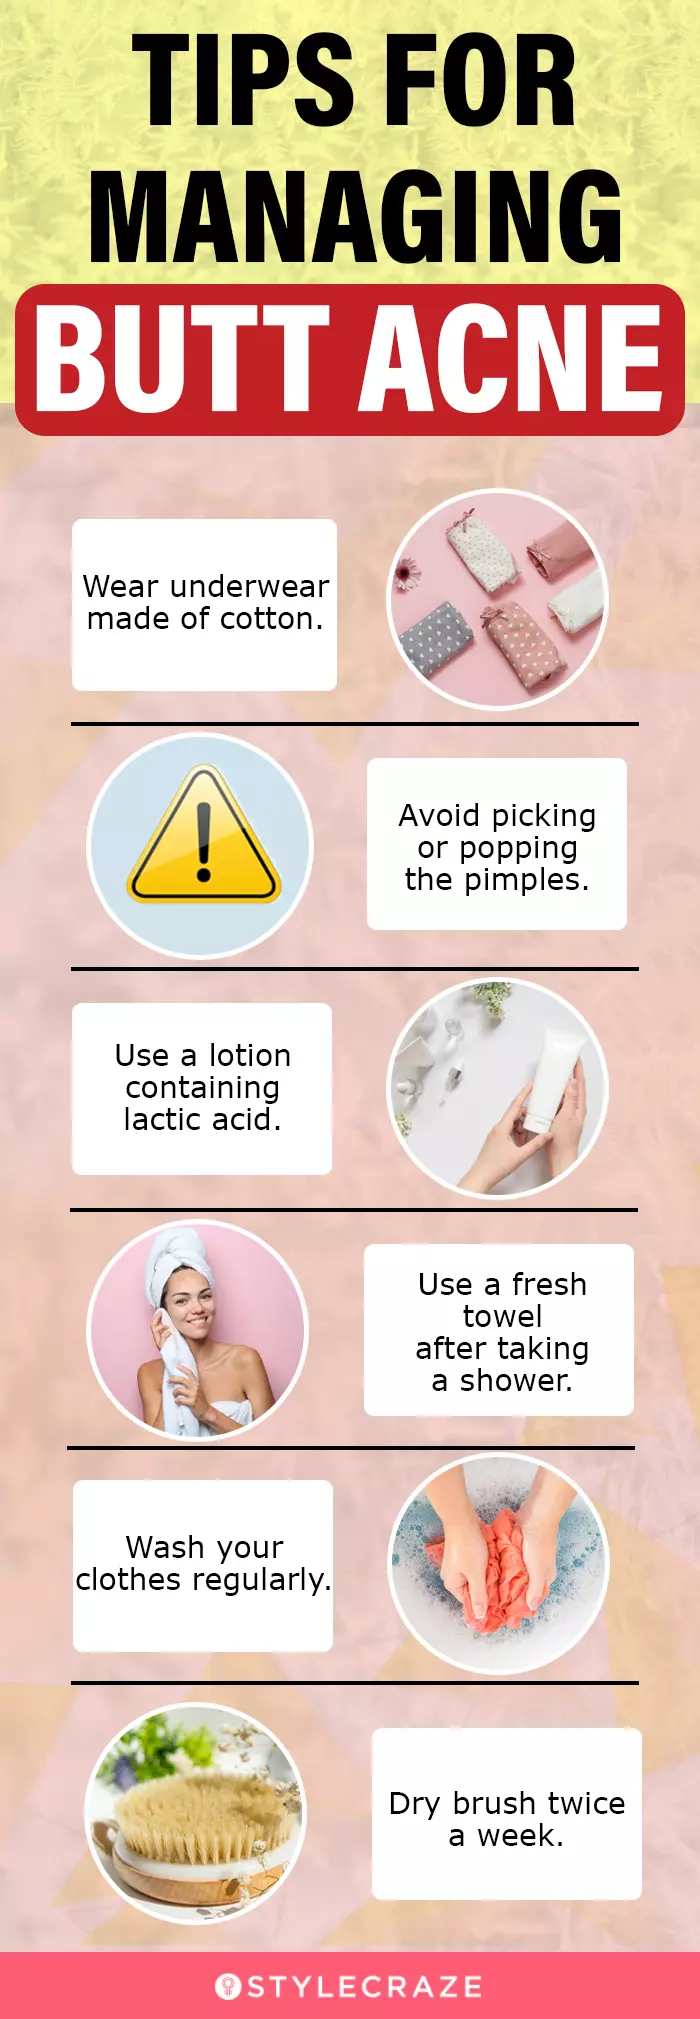 tips for managing butt acne (infographic)